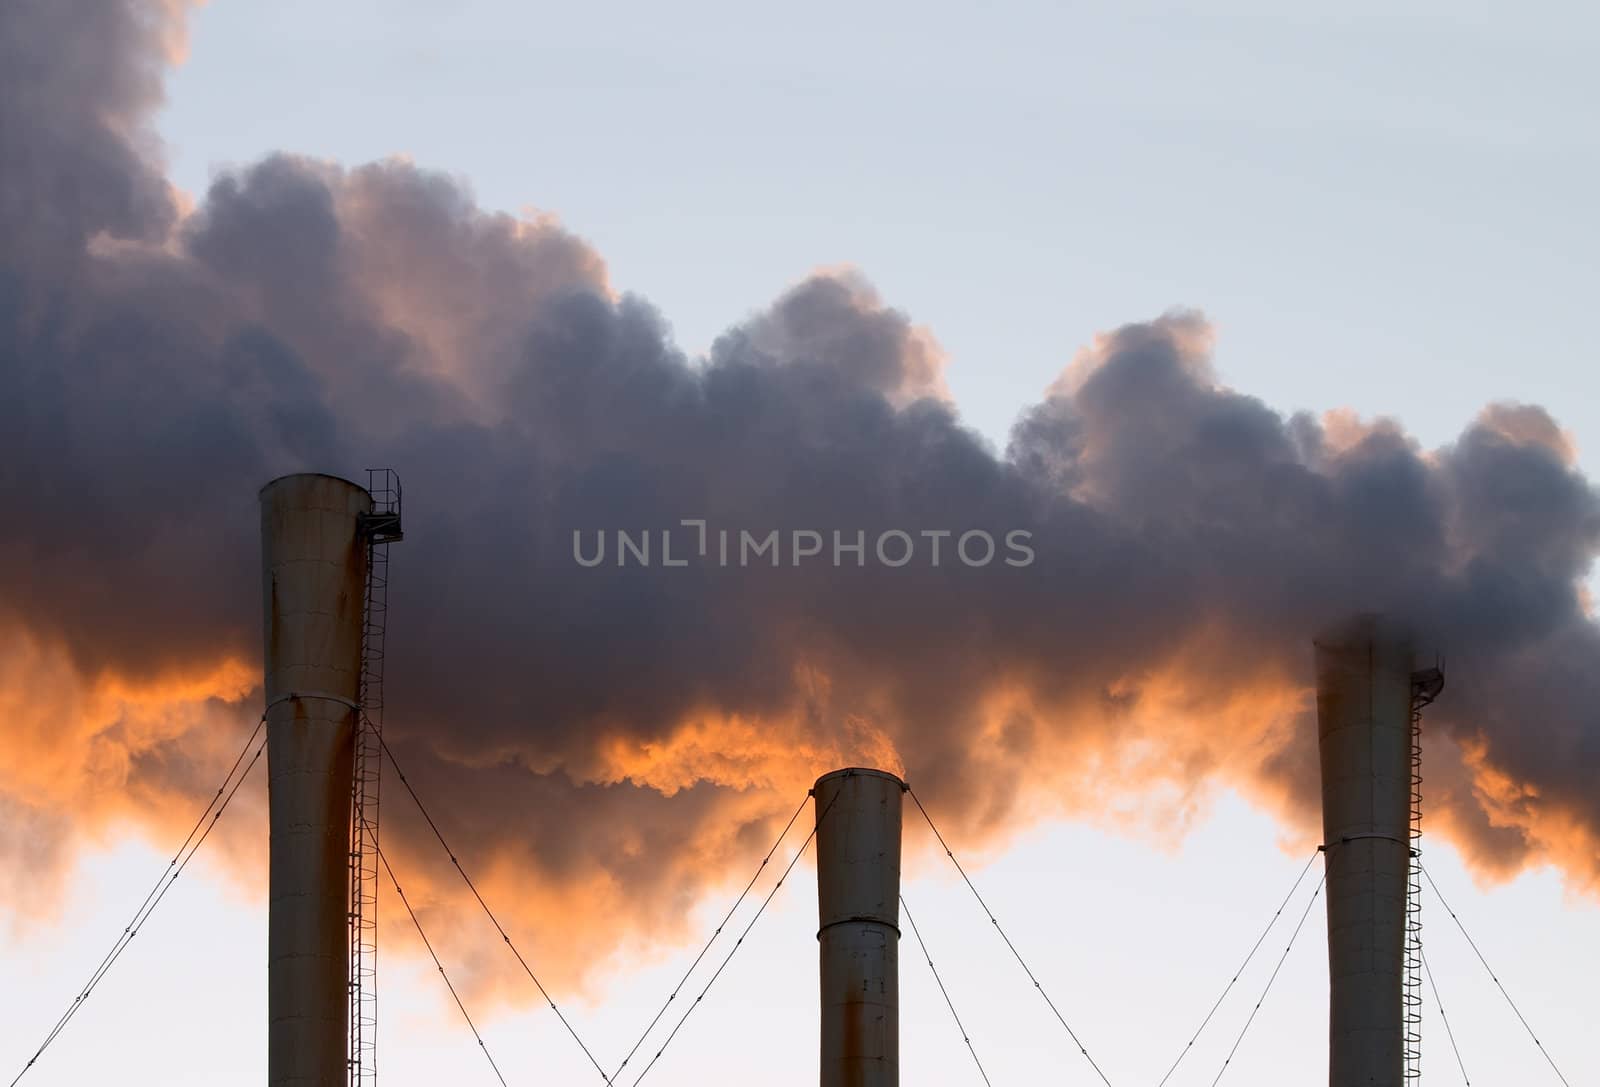 Factory pipes throwing out clouds of orange smoke